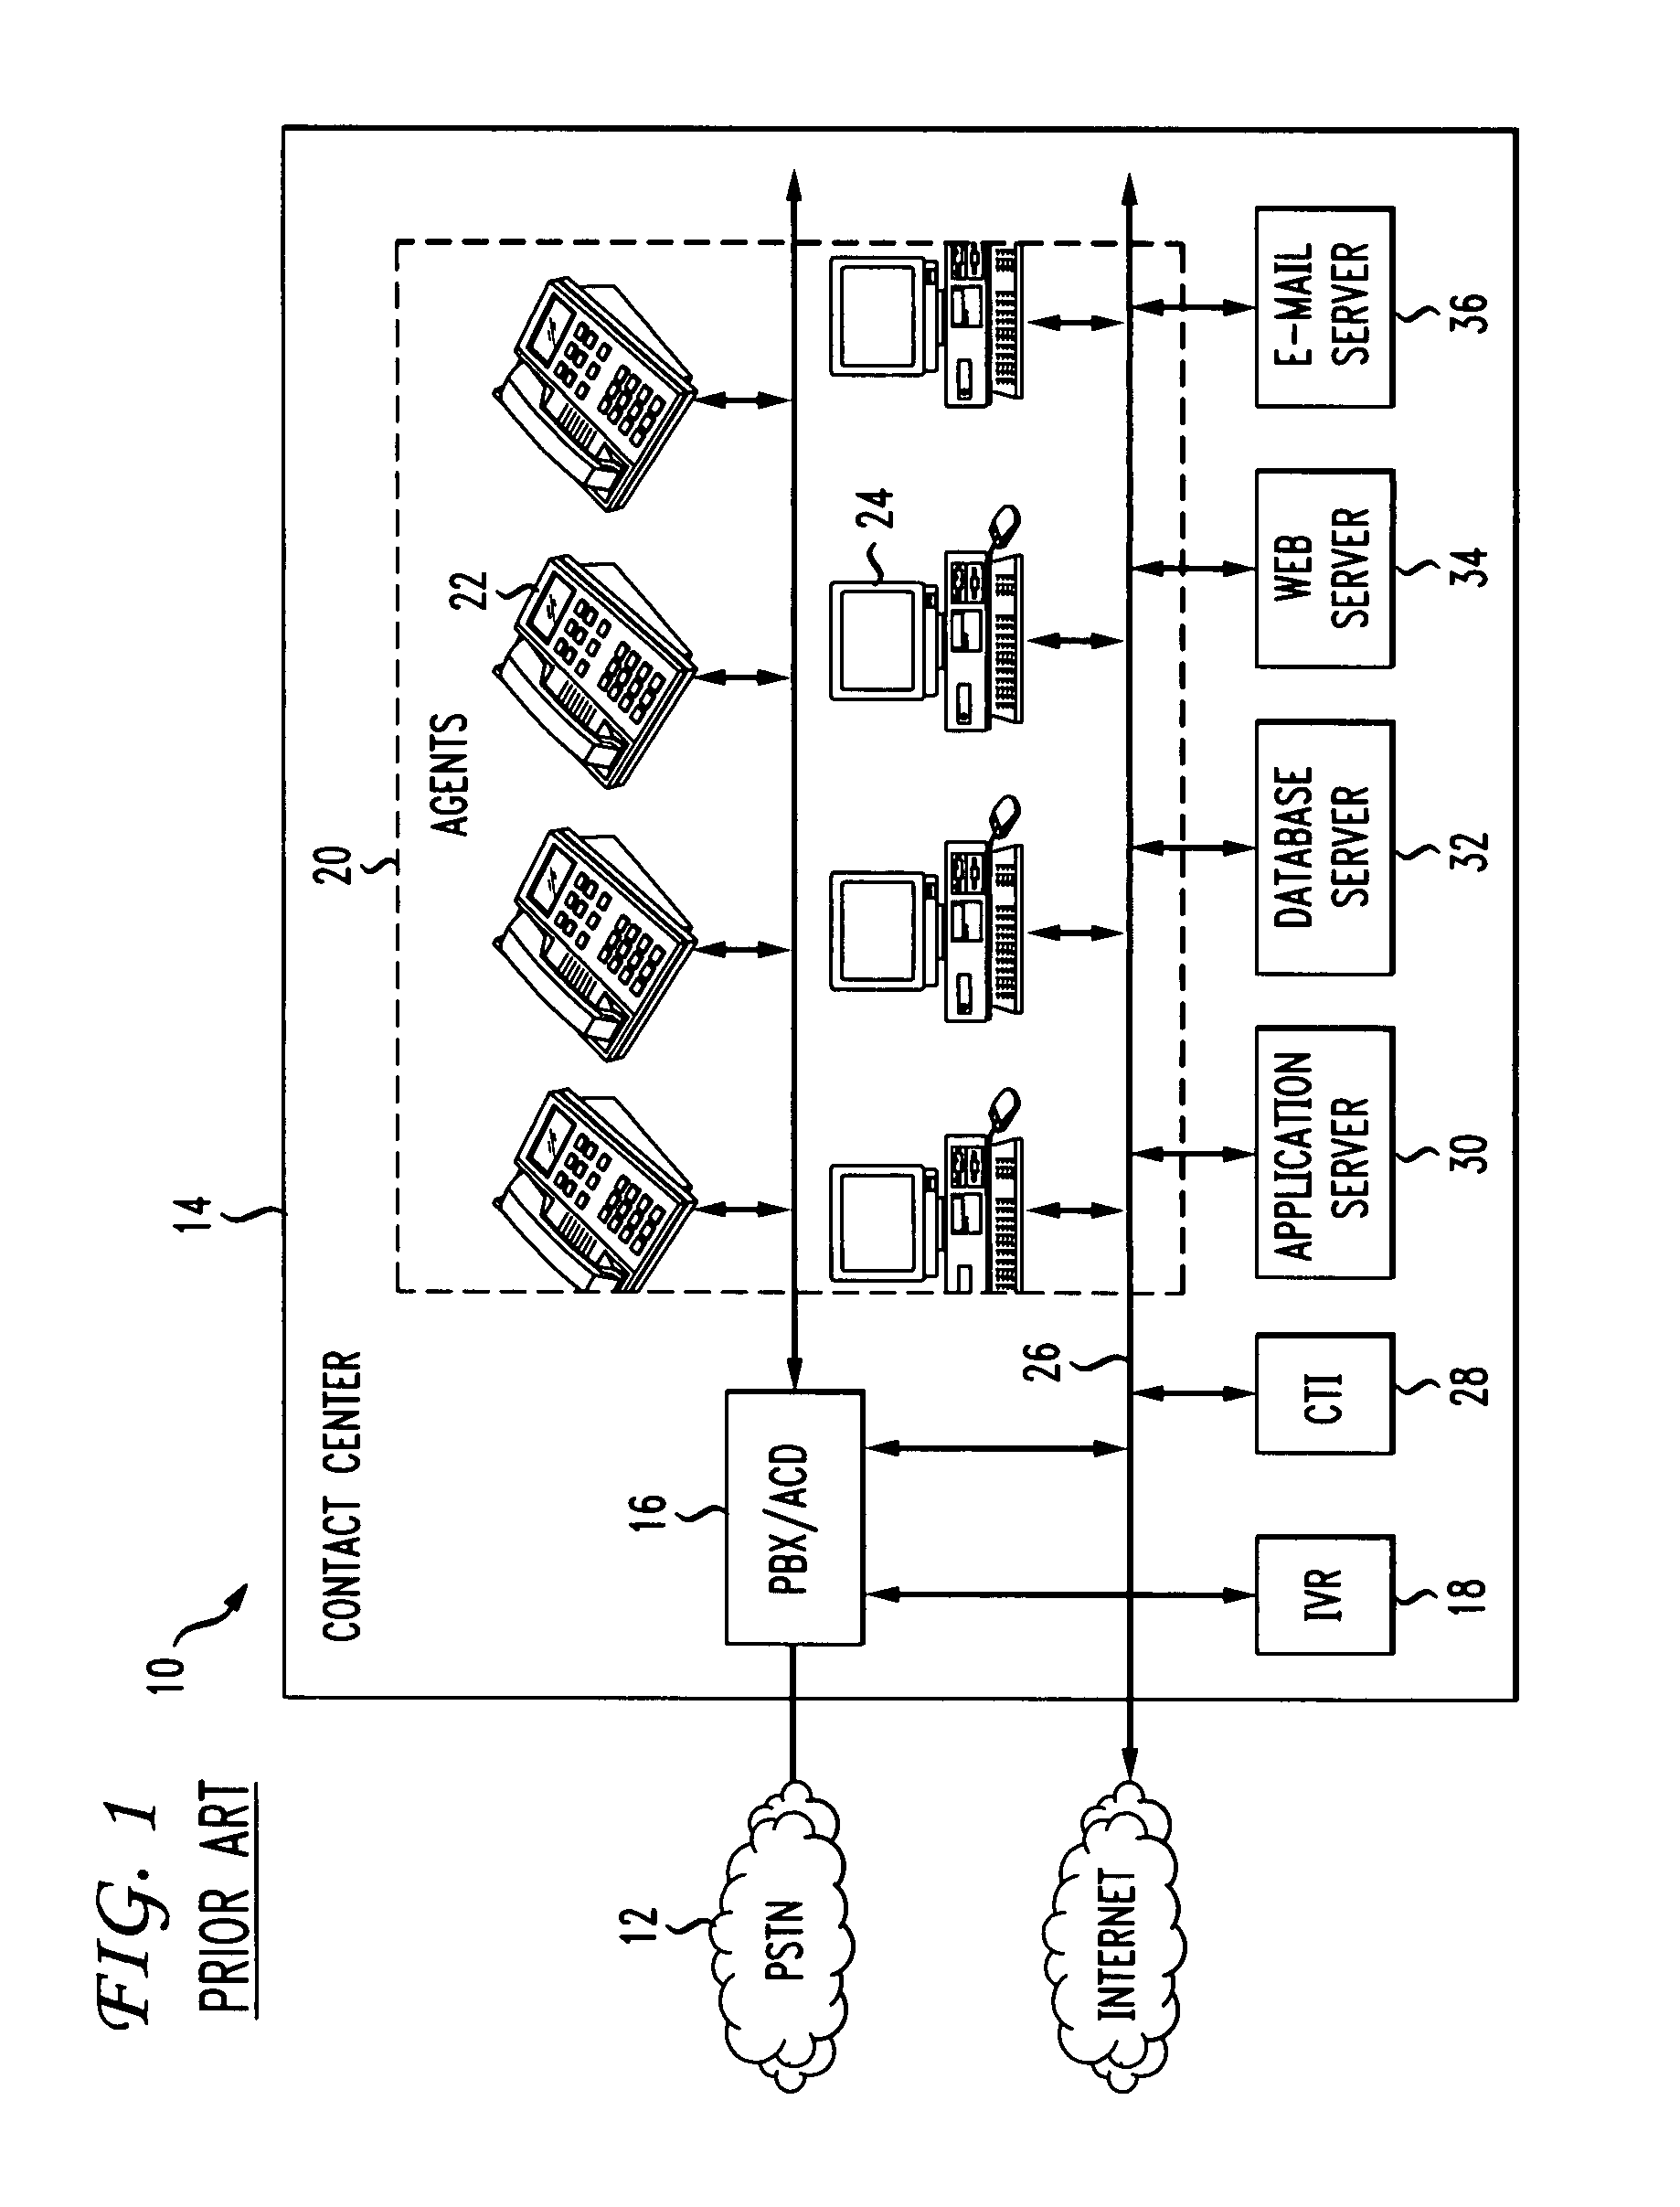 Method and system for assigning tasks to workers